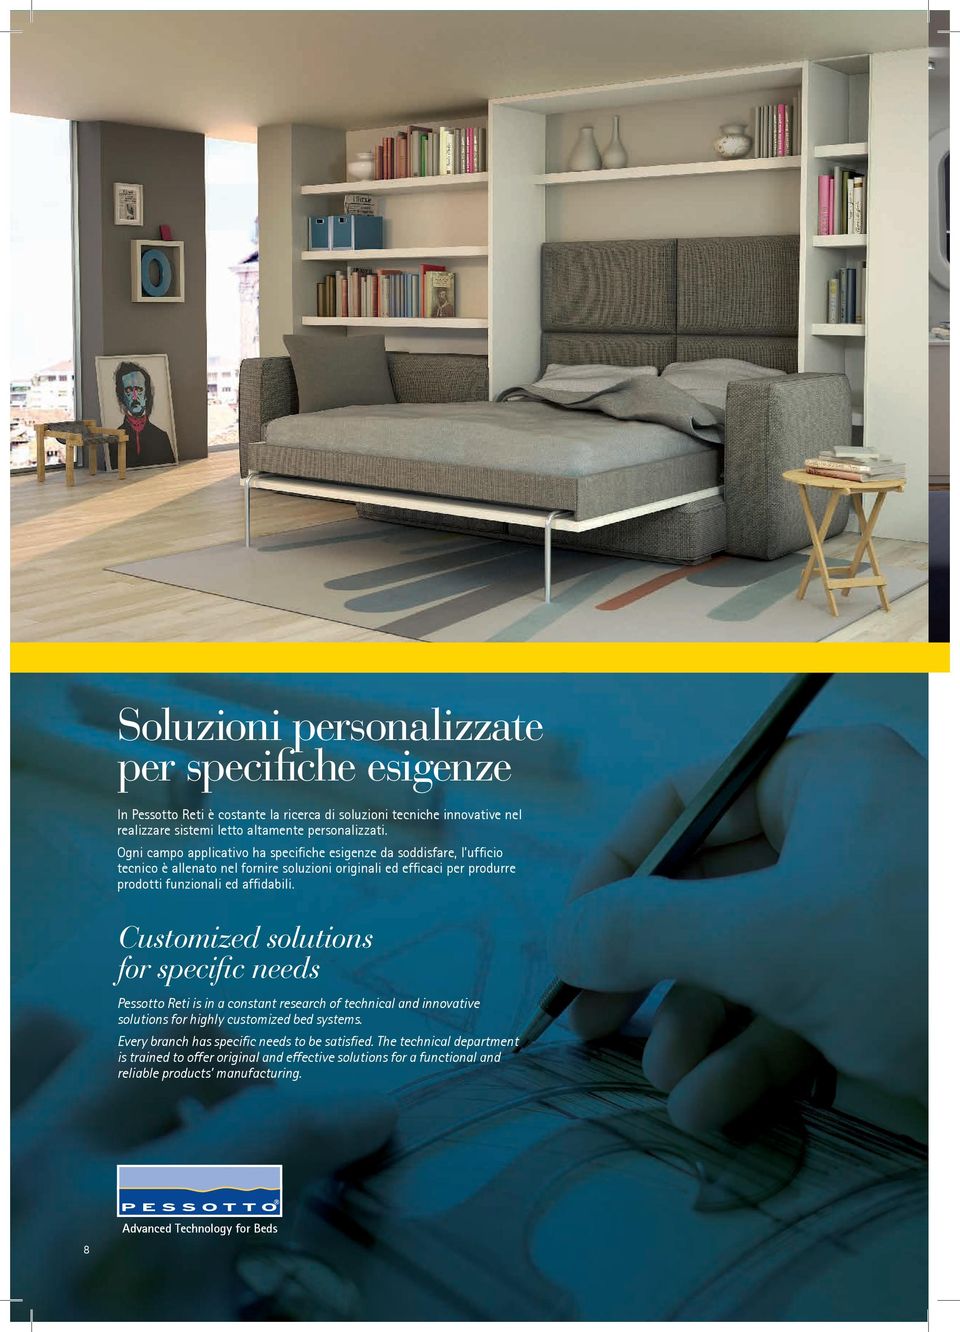 Customized solutions for specific needs Pessotto Reti is in a constant research of technical and innovative solutions for highly customized bed systems.